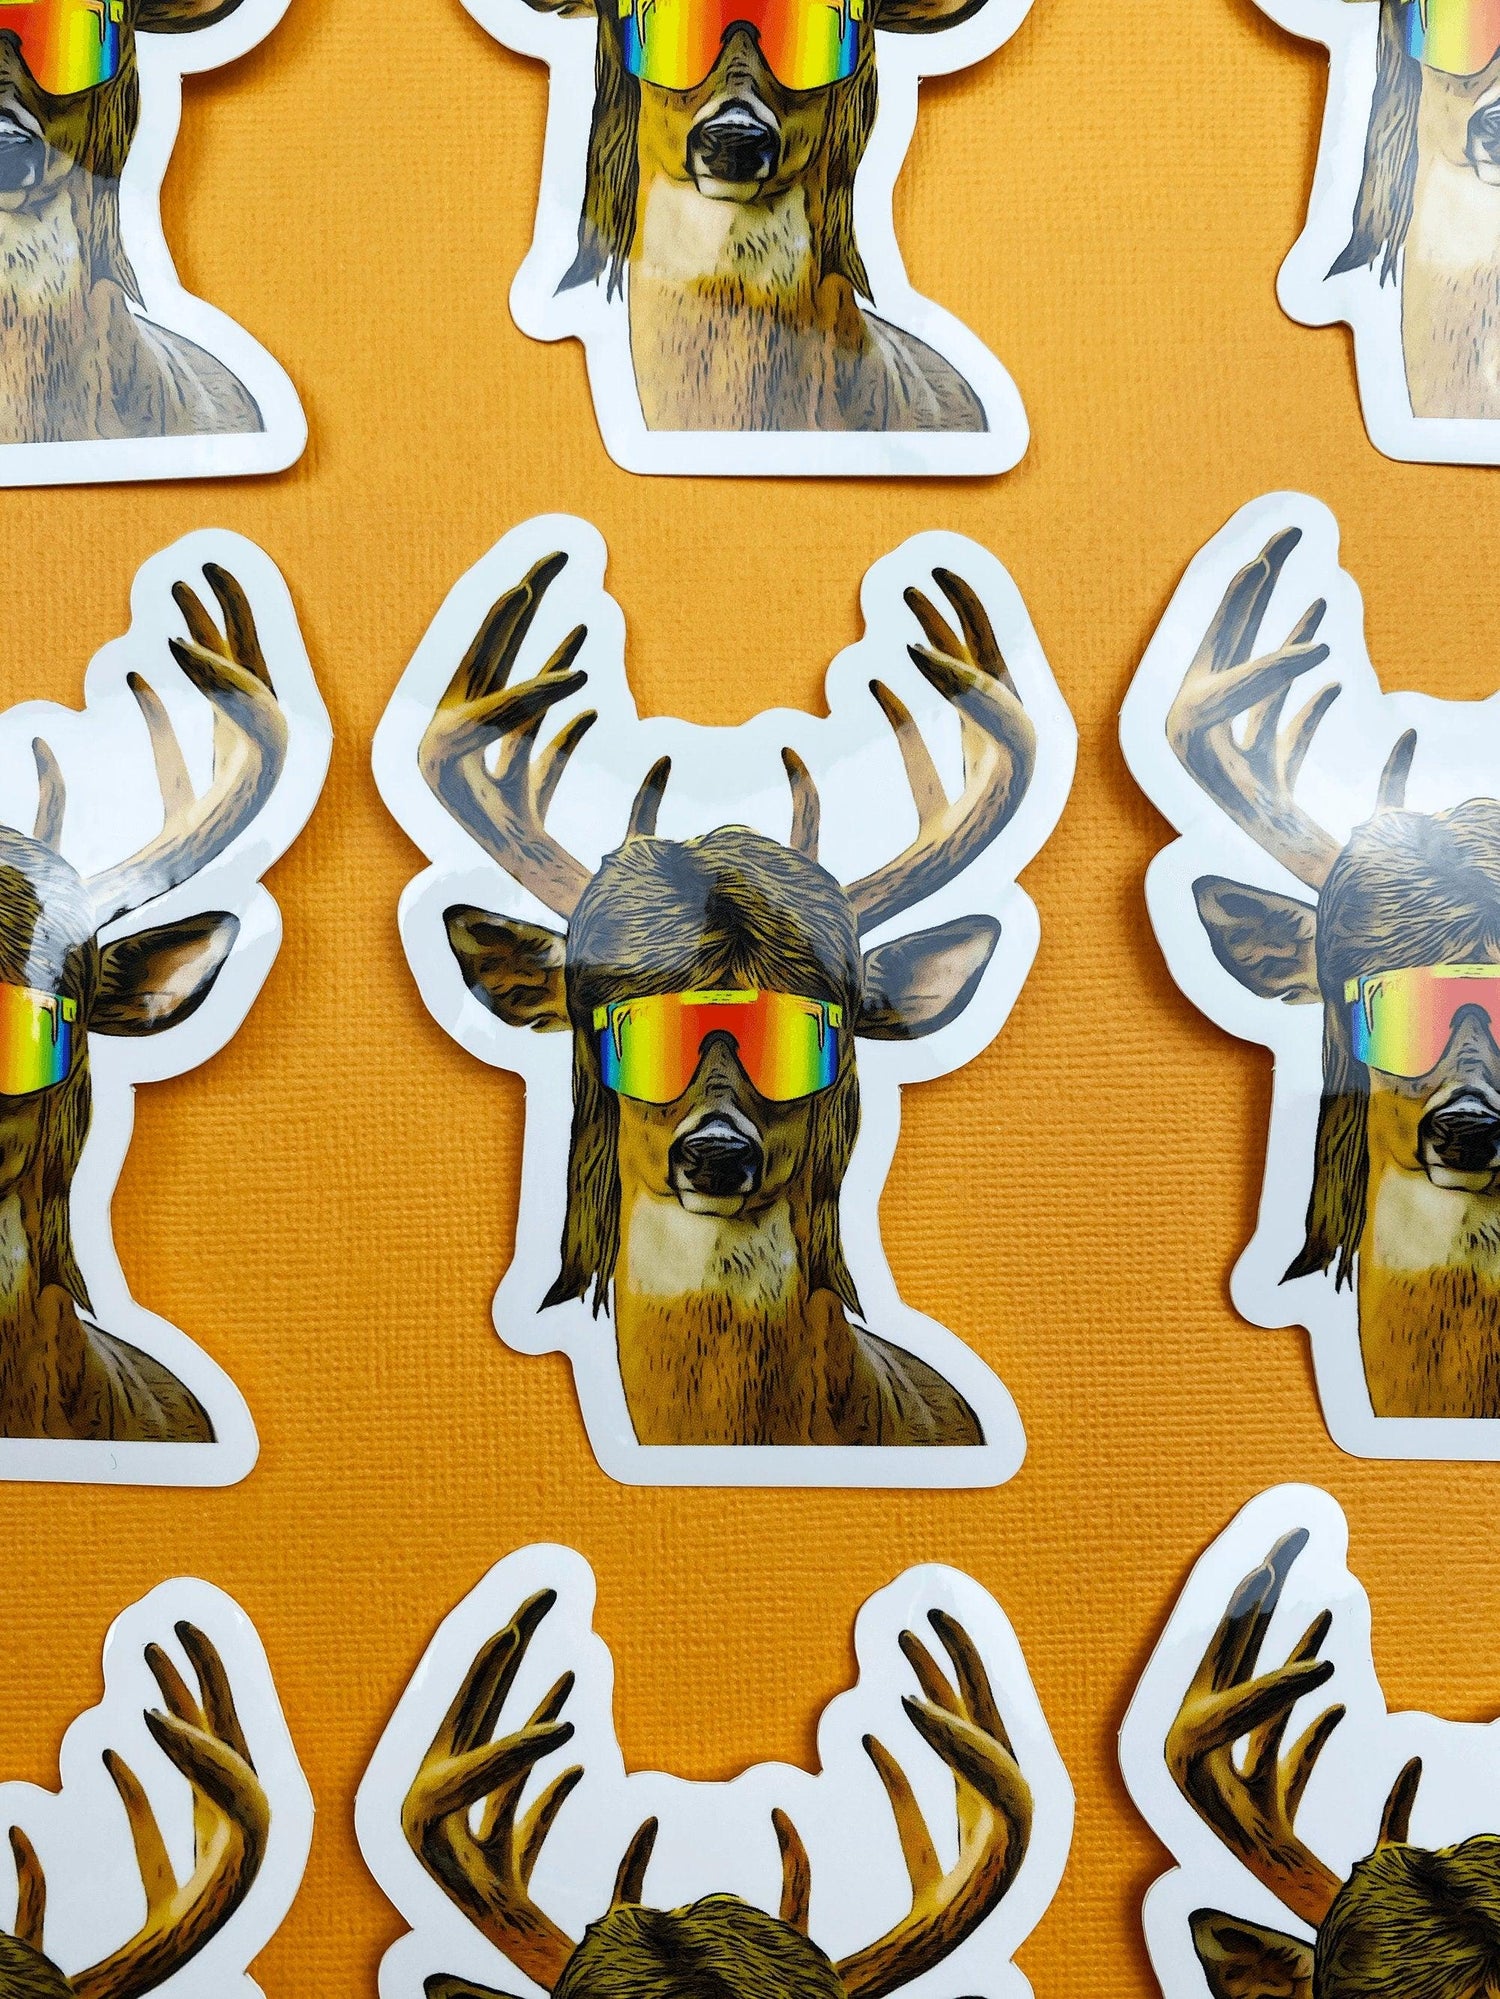 Funny Deer With a Mullet Sticker for Hunters Hunting Fans, Deer Sticker, Deer Hunting Gift, Deer Hunter Sticker, Deer Hunter Decal for Truck - Ottos Grotto :: Stickers For Your Stuff